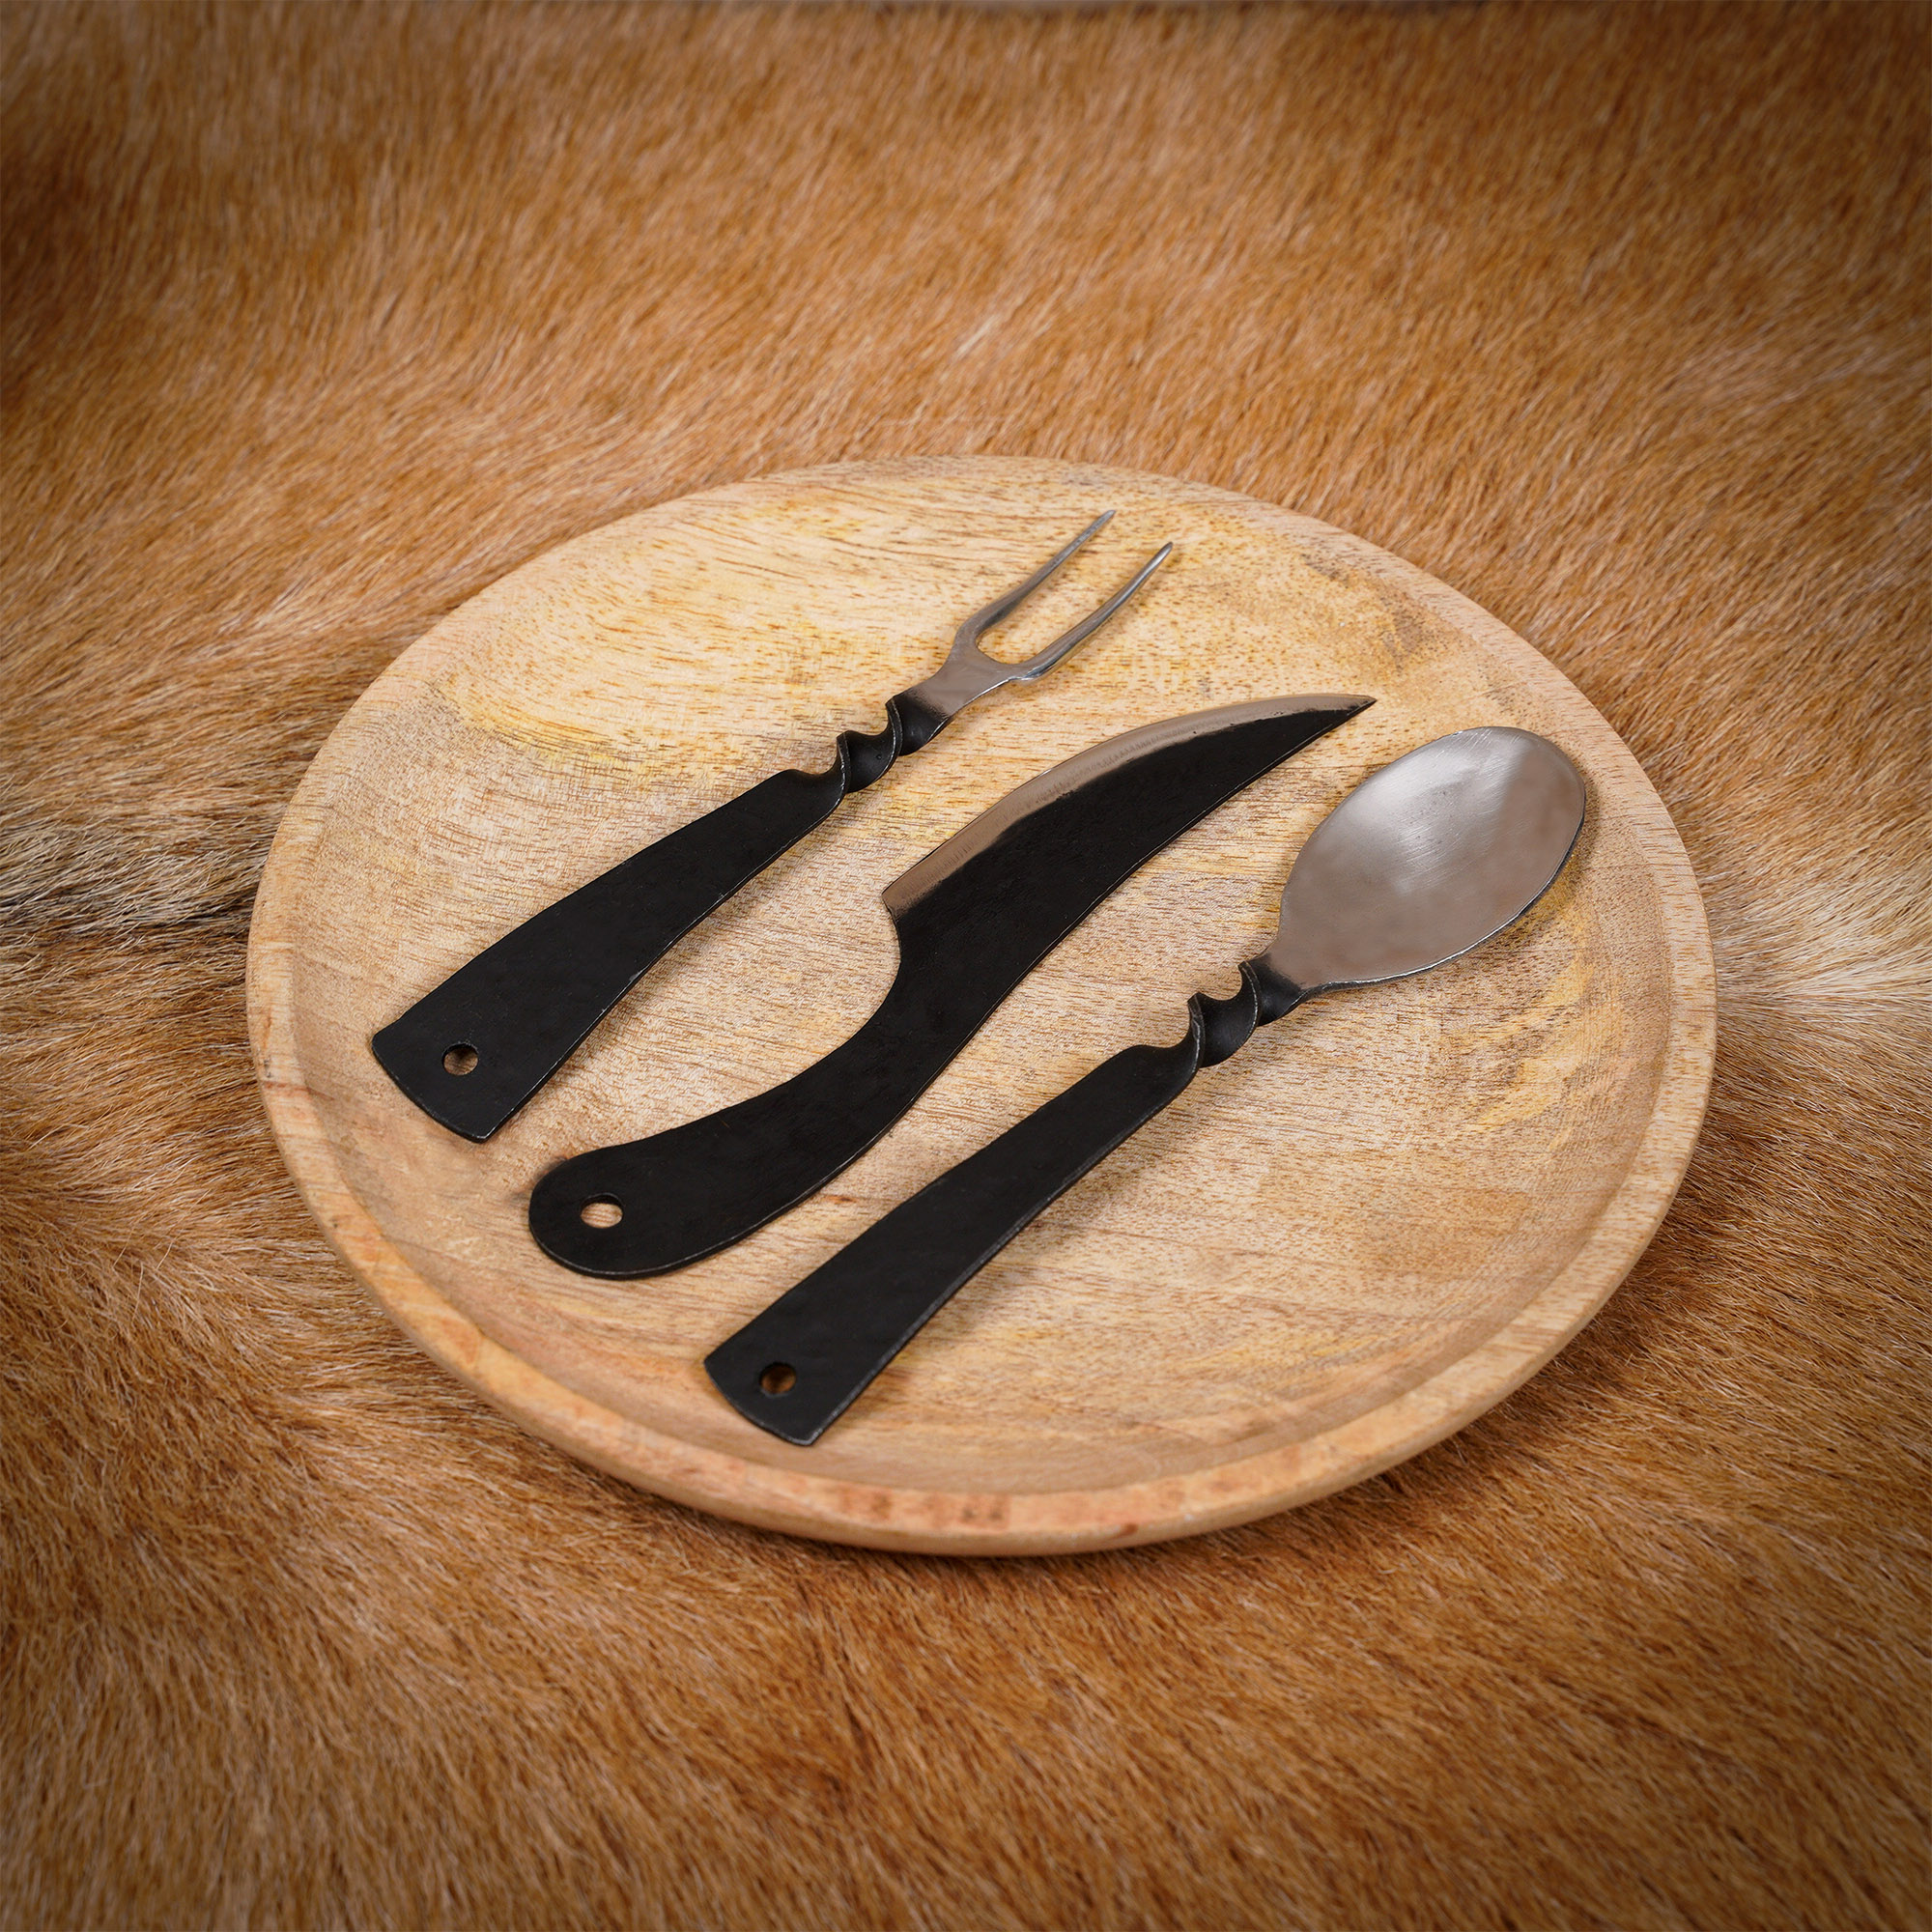 ✨ Rustic Viking Cutlery Set Hand Crafted Stainless Steel